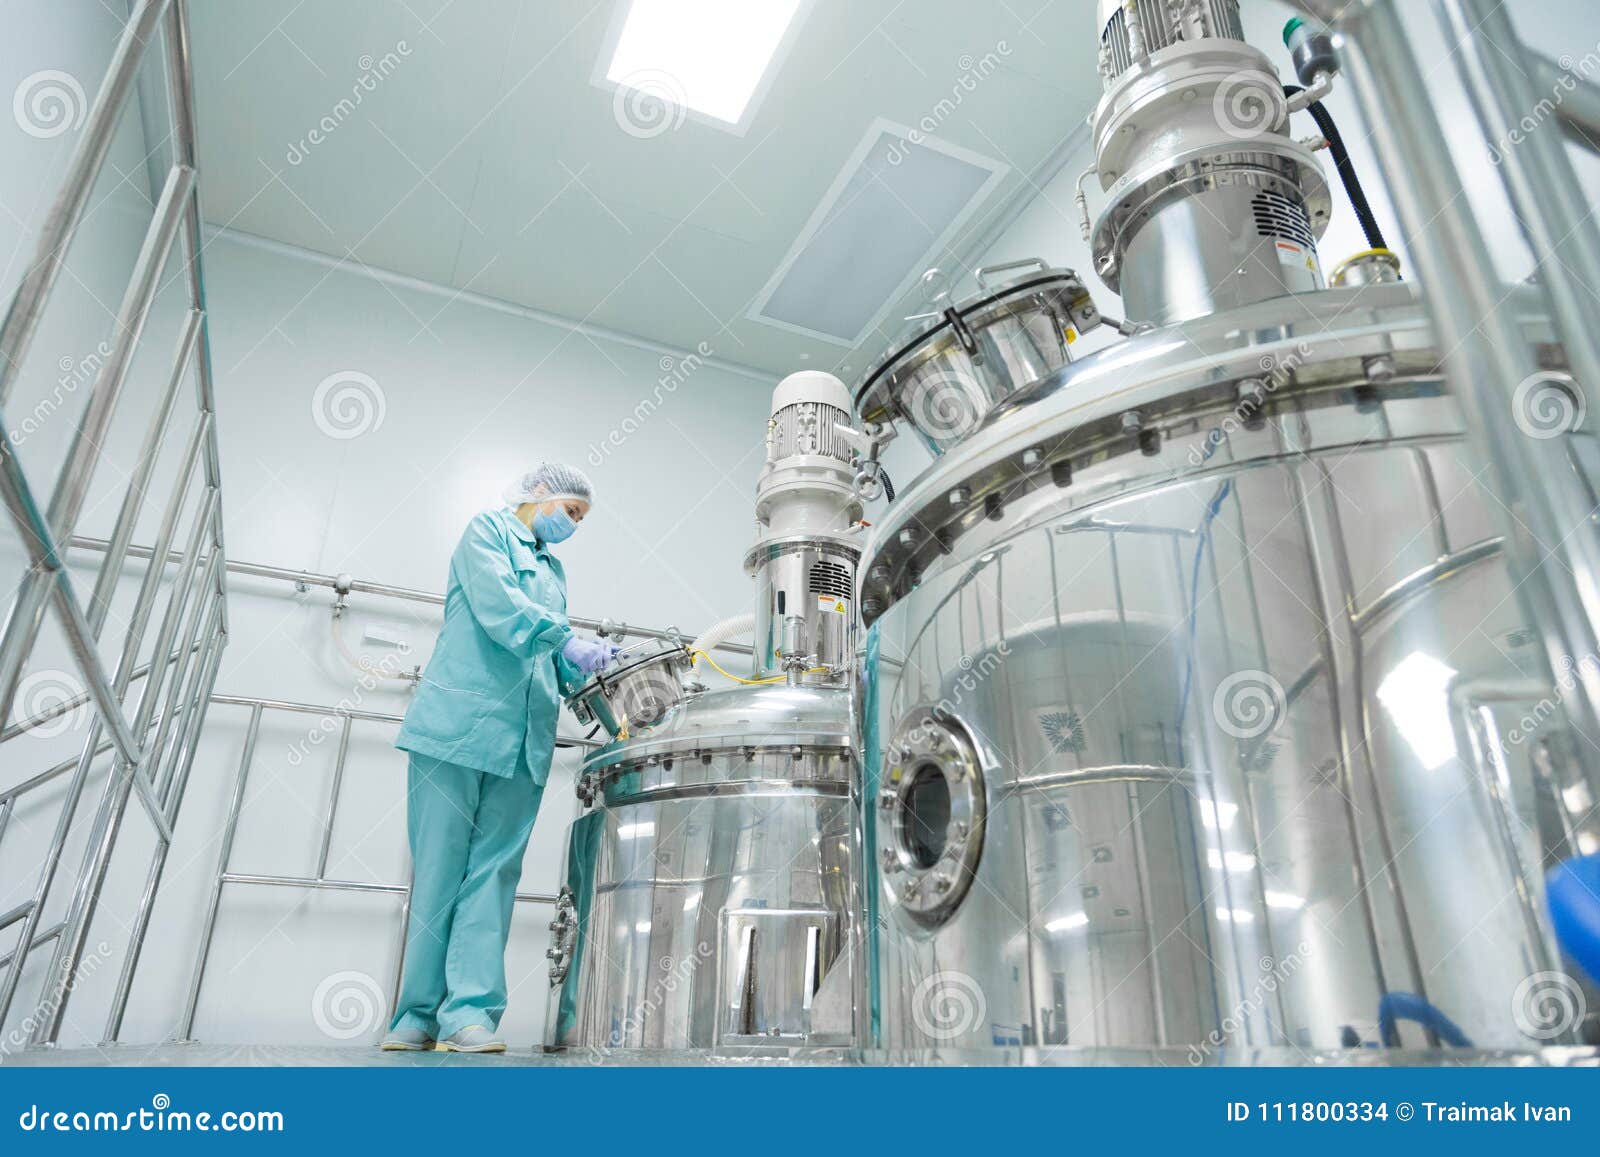 pharmaceutical factory woman worker in protective clothing operating production line in sterile environment